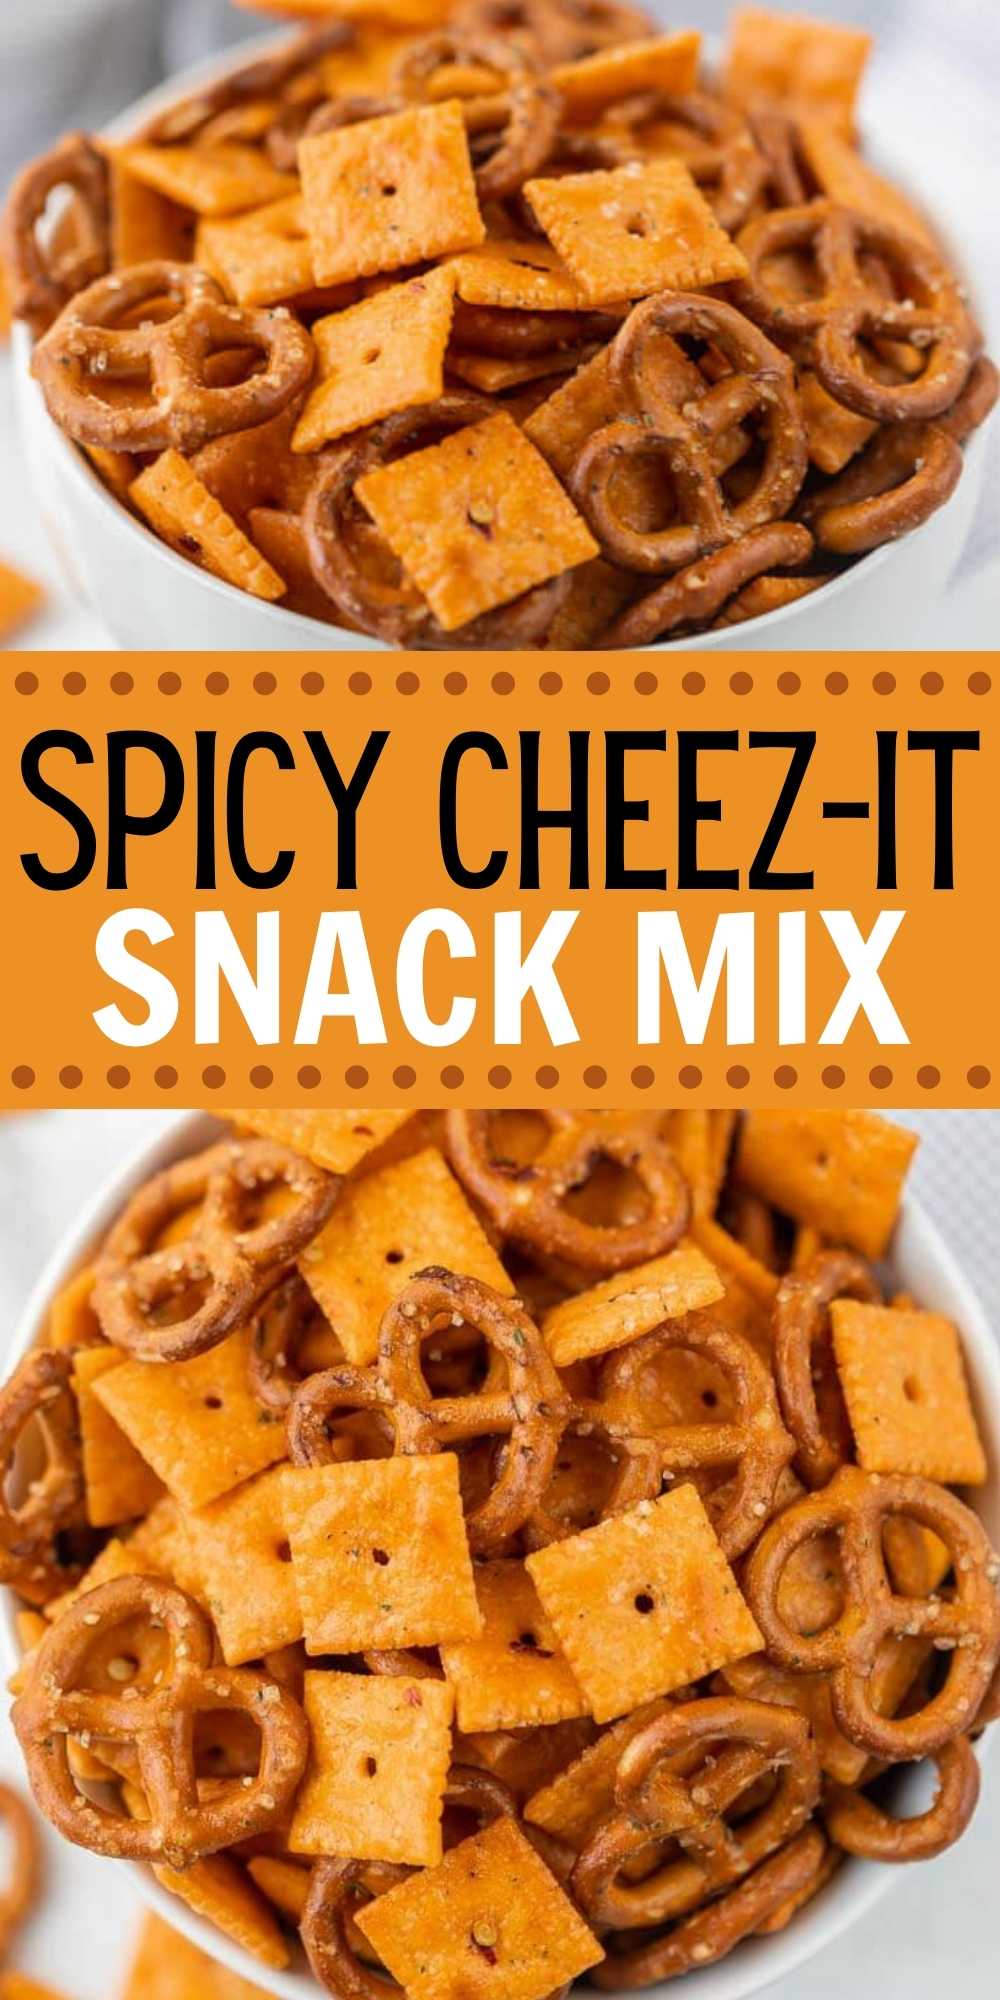 If you are looking for a game day snack then this spicy cheez-it snack mix recipe is perfect! Spicy Cheez-its are amazing but taste even better in this easy cheez-it snack mix with red peppers.  You’ll love this easy to make snack recipe.  #eatingonadime #snackrecipes #cheezits #cheezitrecipes 
